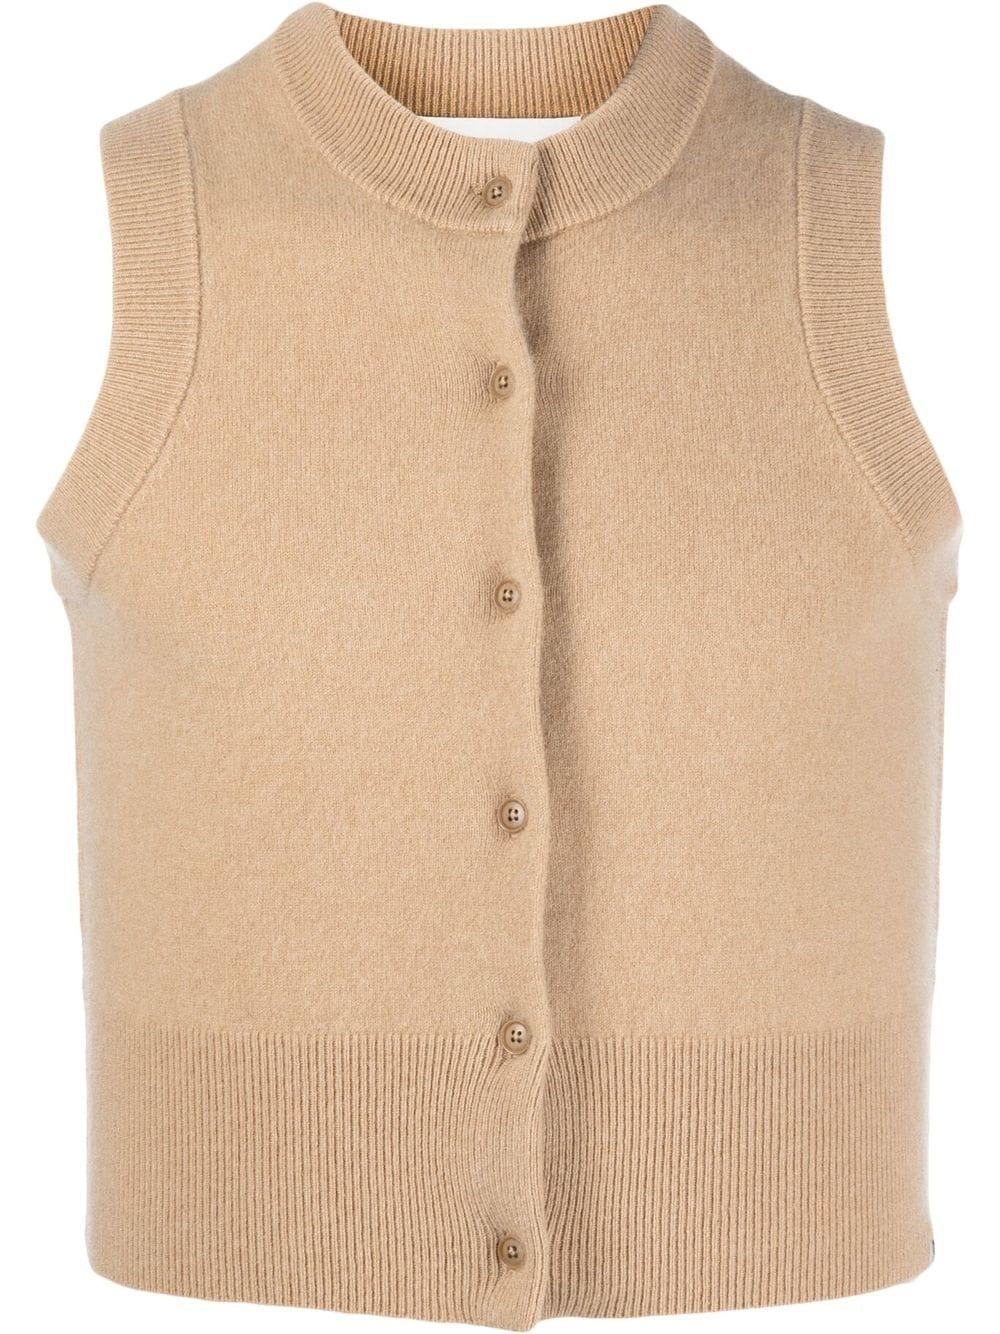 Extreme Cashmere N°193 Corset Sleeveless Cardigan Vest in Natural | Lyst